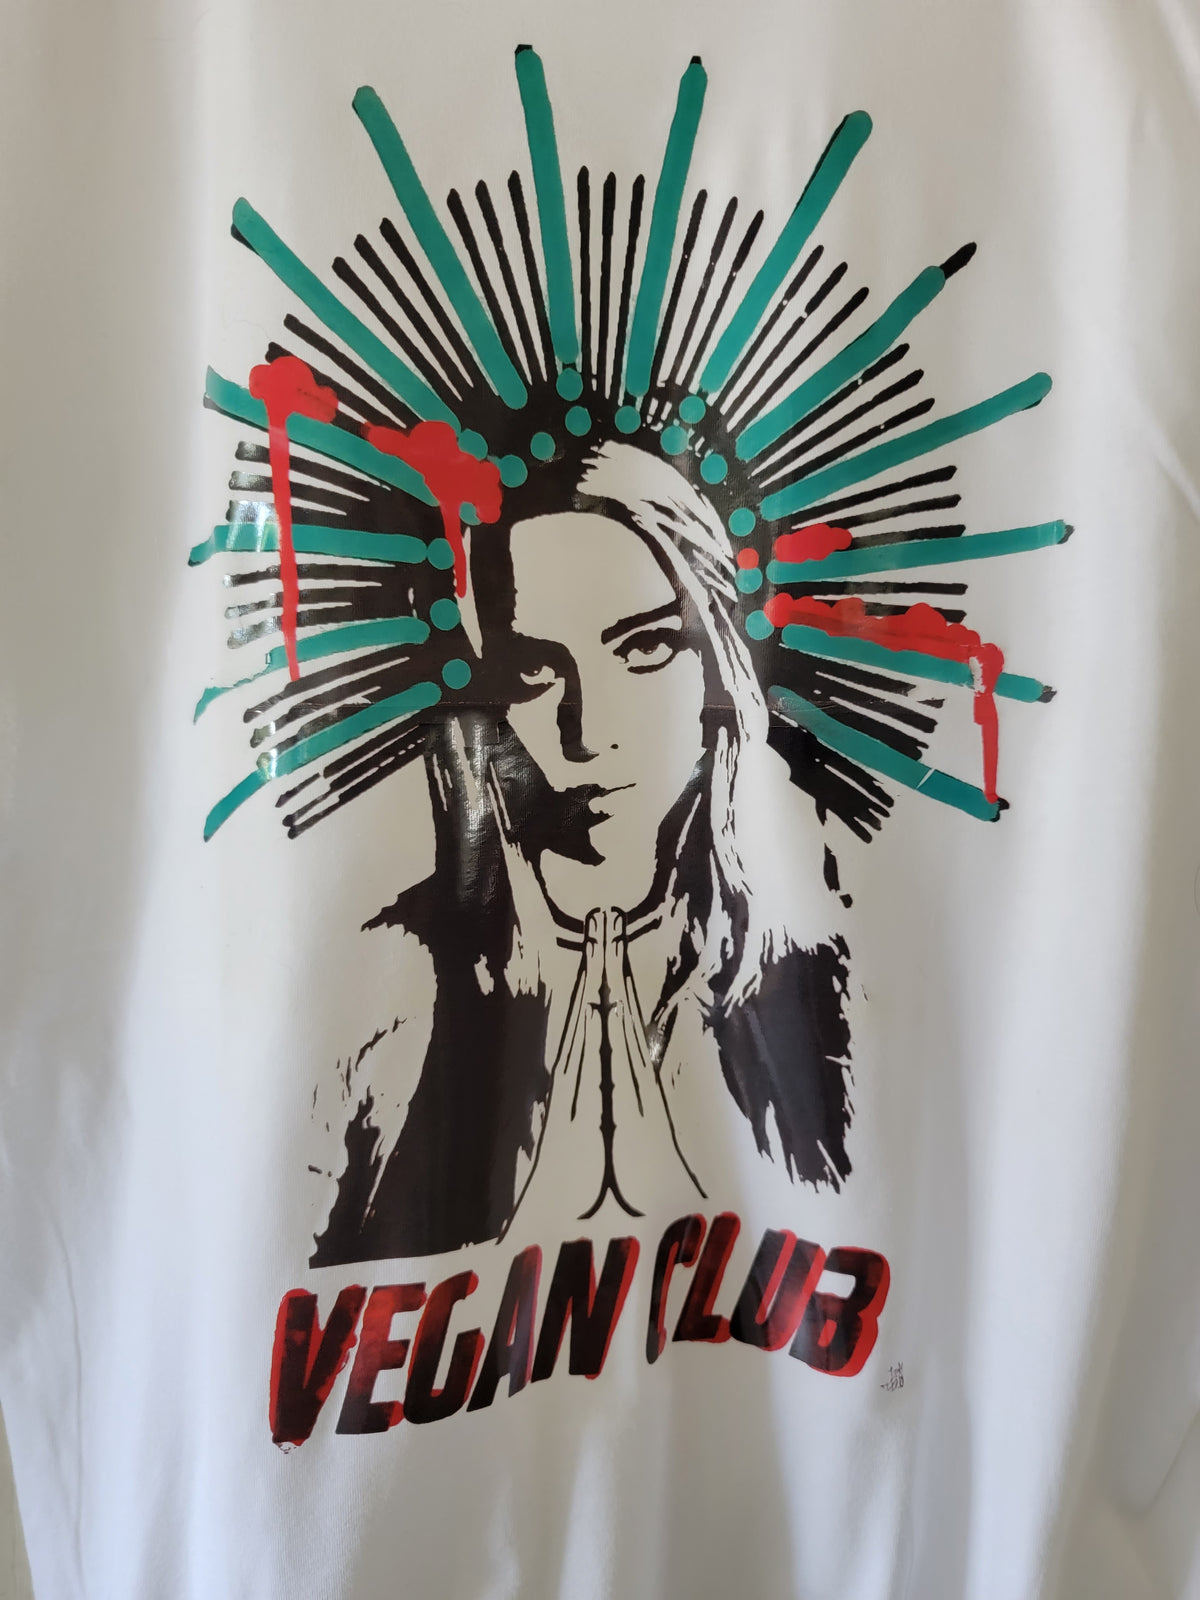 SOLD OUT - Billie Eilish Halo praying Vegan Club T-shirt with large full front design in color collab with @_ebik_fgs_fh_